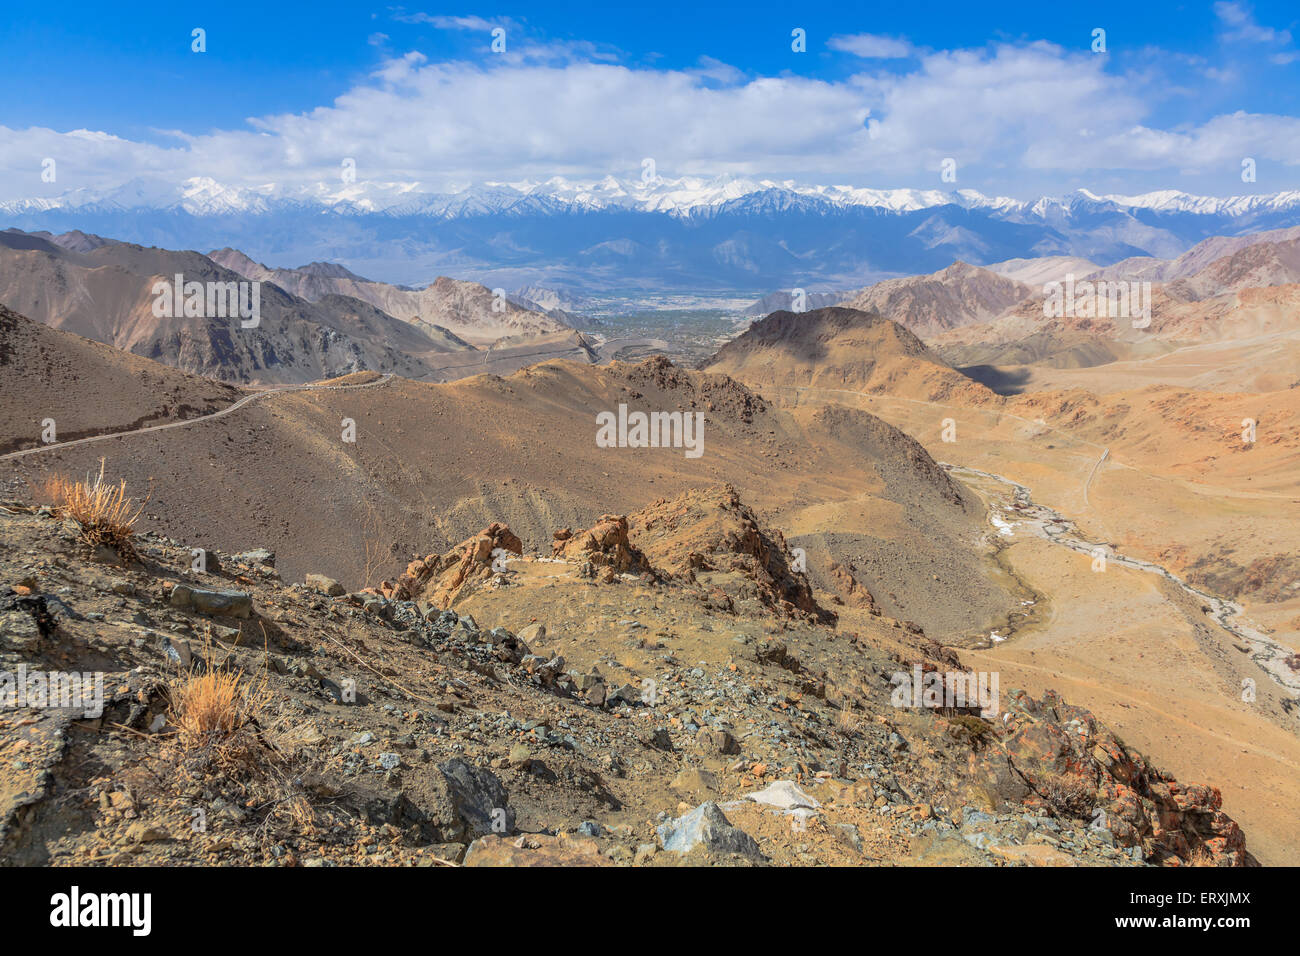 Viewpoint at the mountain road in Leh, Ladakh Region, India Stock Photo